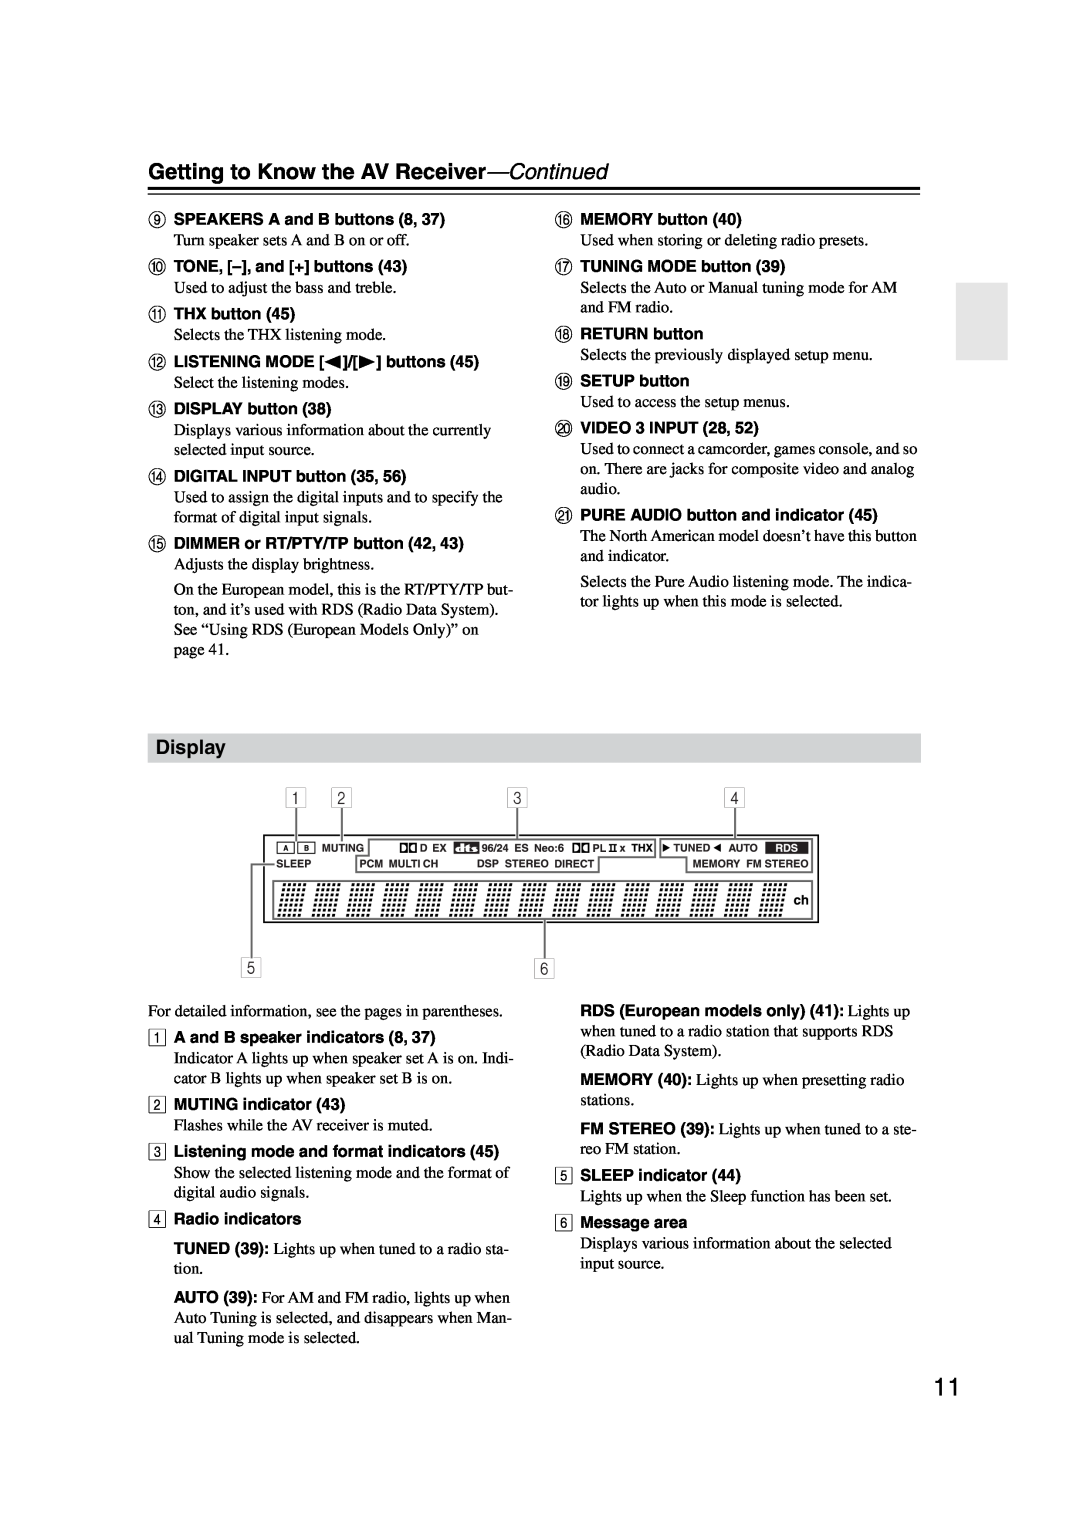 Onkyo HT-S990THX instruction manual Getting to Know the AV Receiver-Continued, Display 